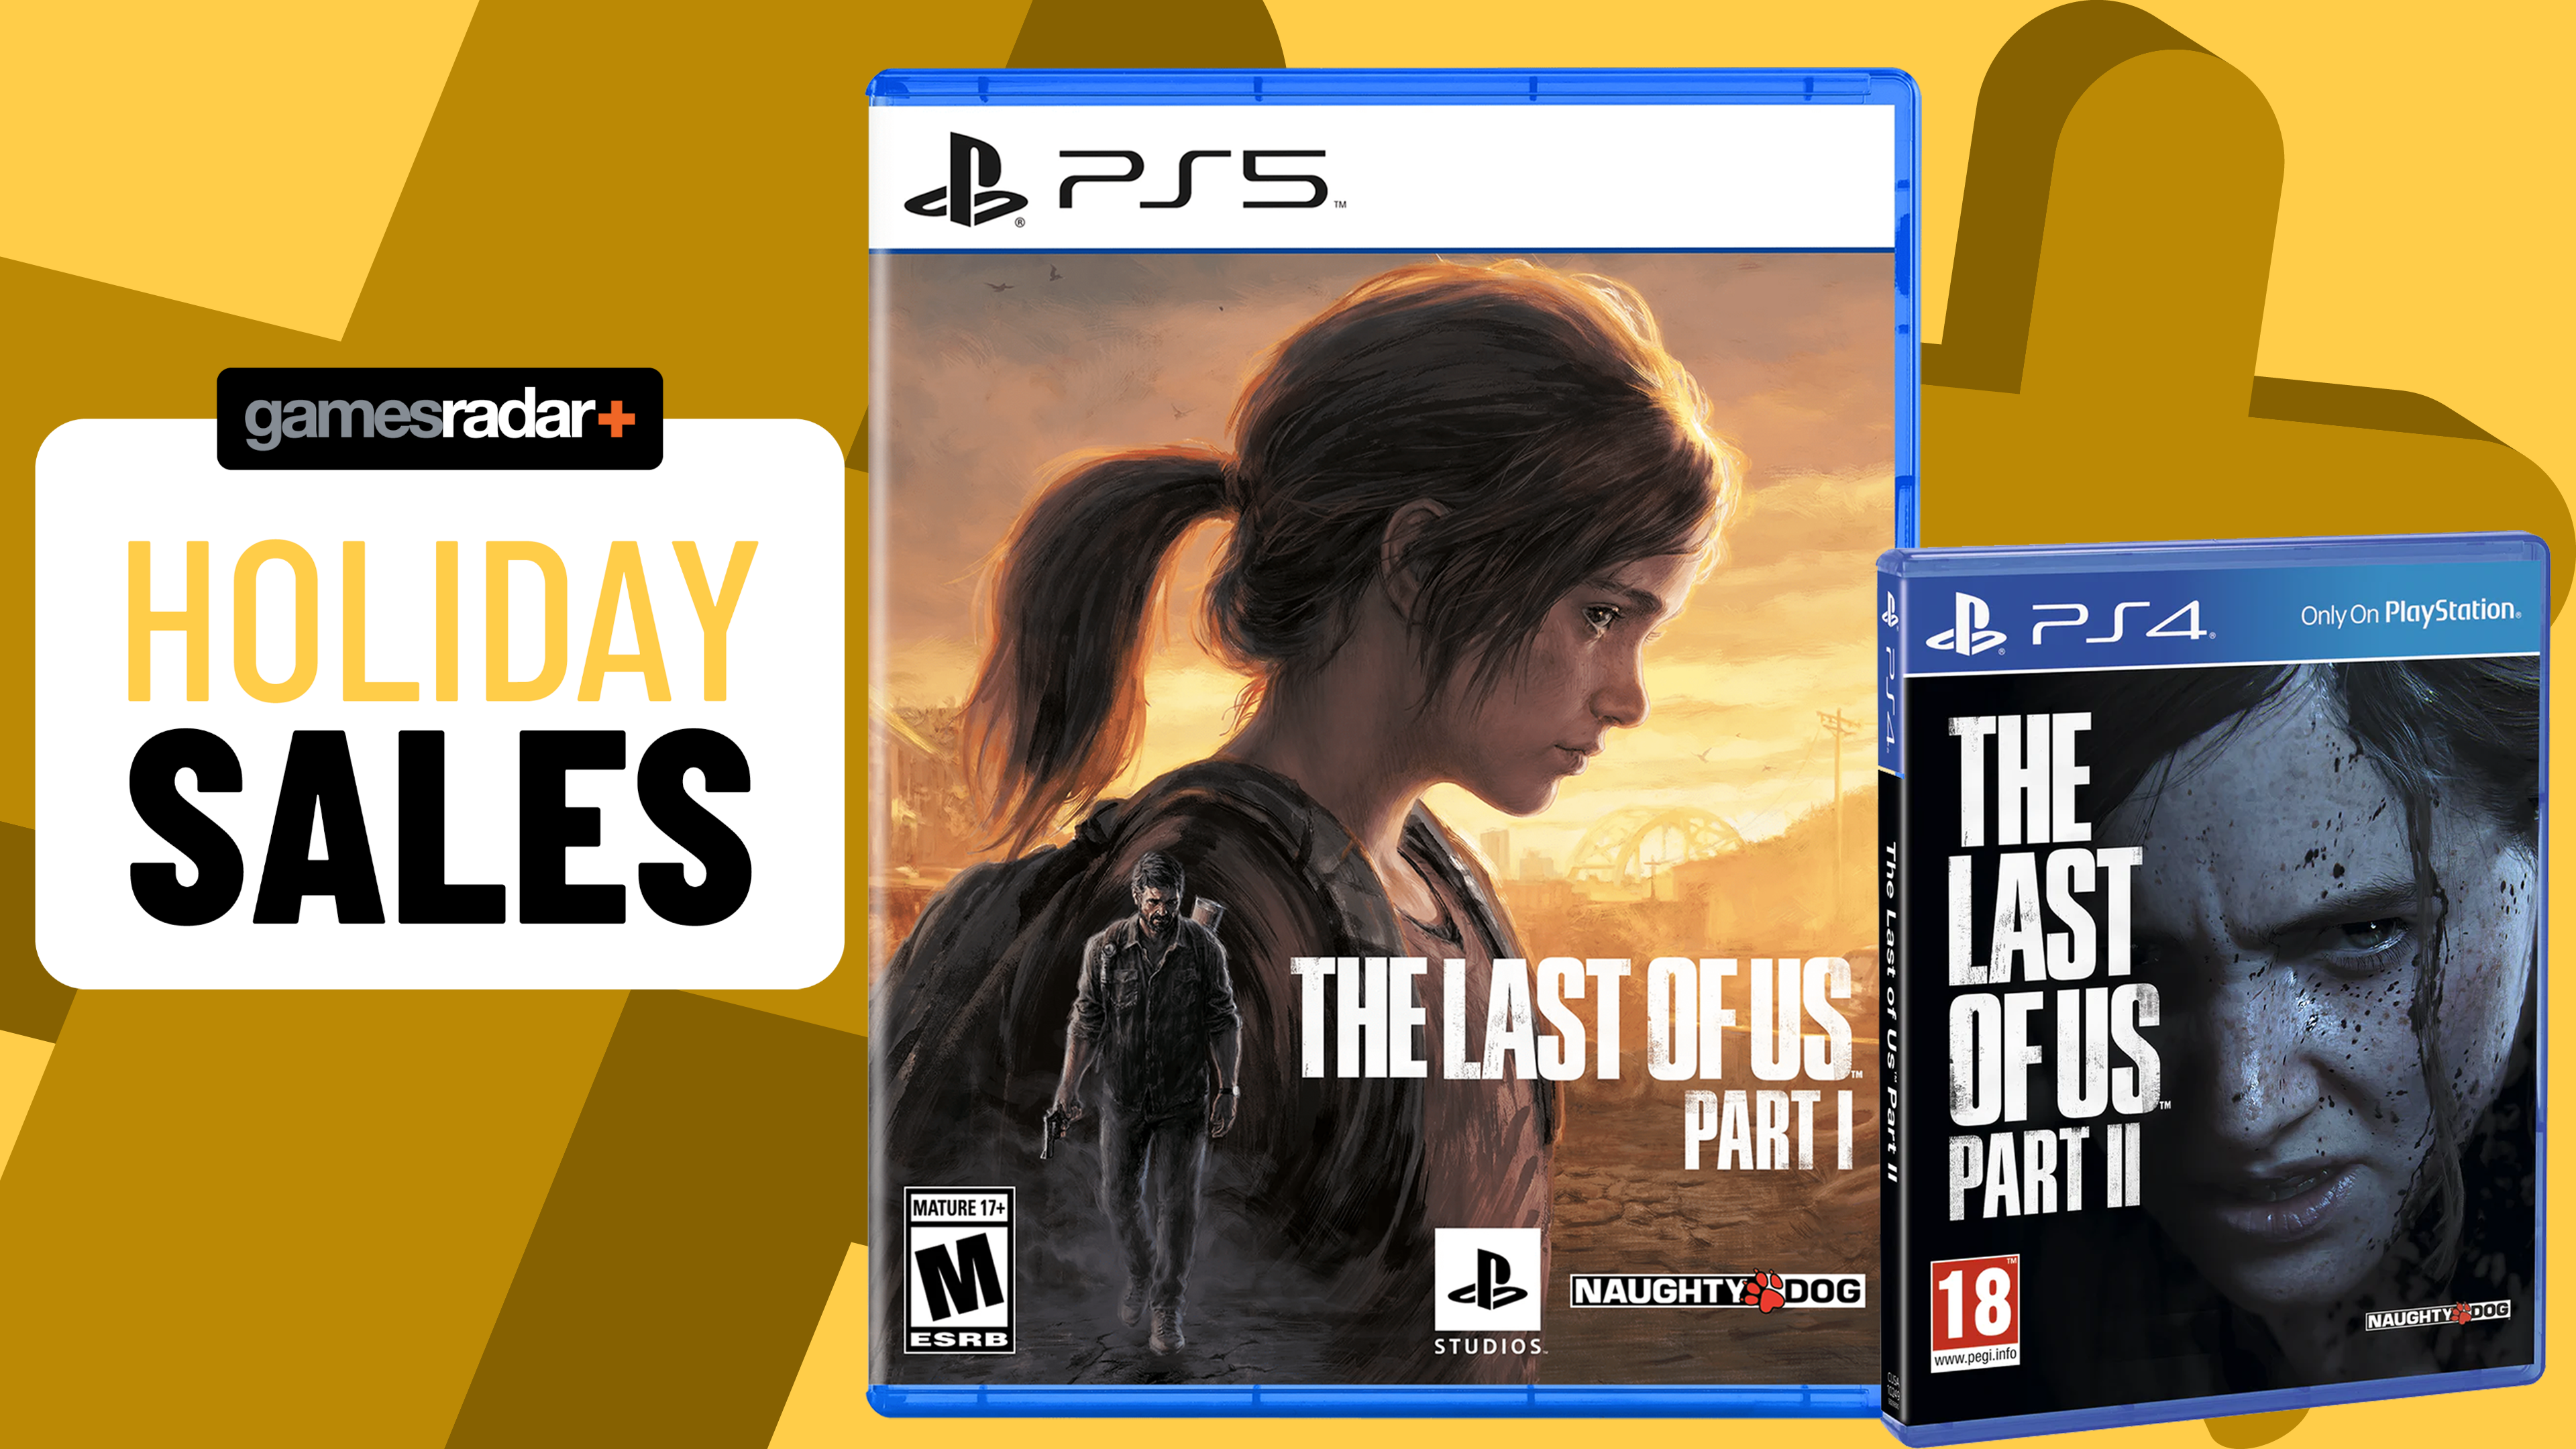 The Last of Us' Remastered for the PS5 is $50 on